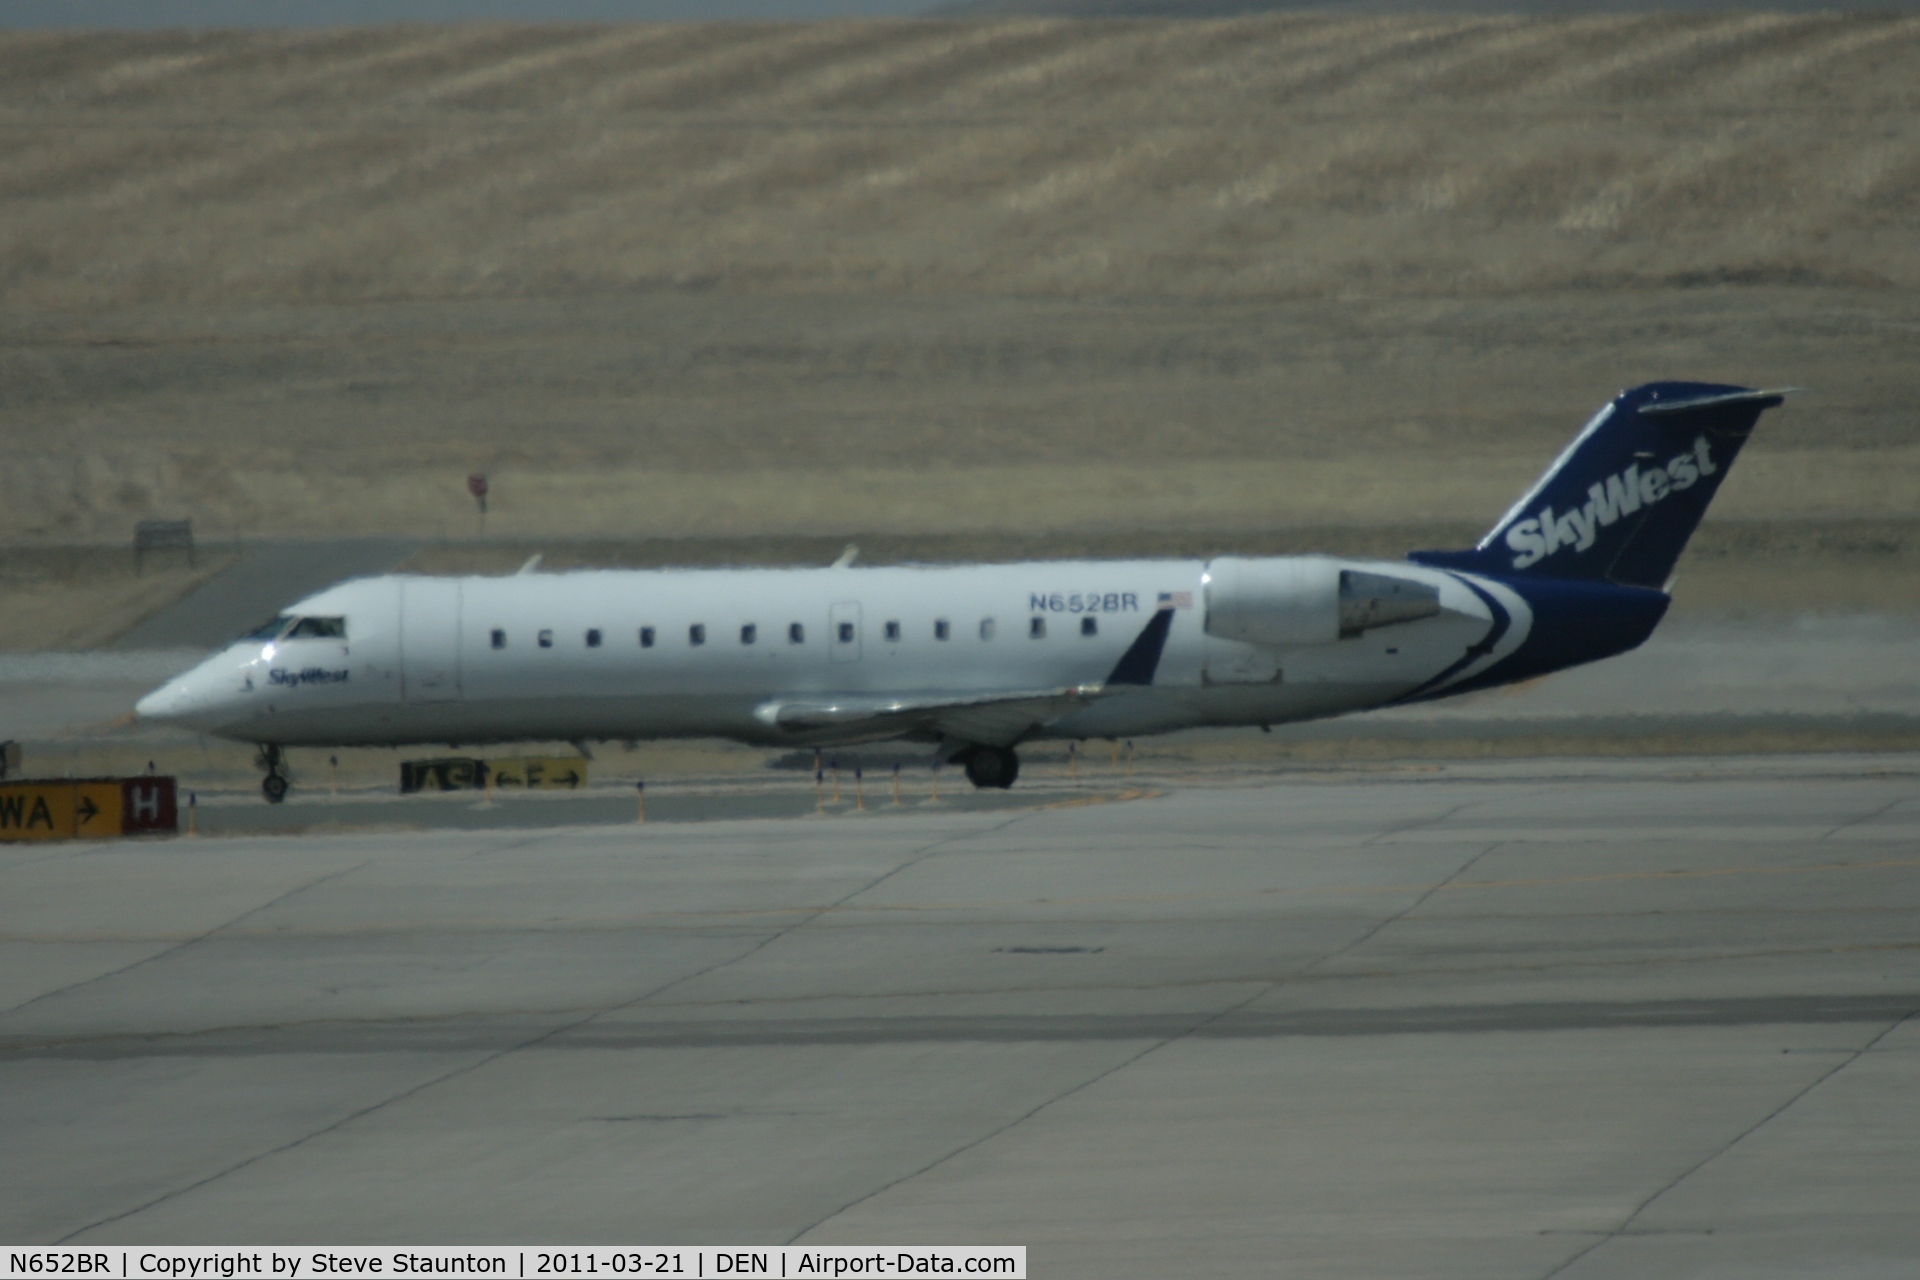 N652BR, 2000 Bombardier CRJ-200ER (CL-600-2B19) C/N 7429, Taken at Denver International Airport, in March 2011 whilst on an Aeroprint Aviation tour